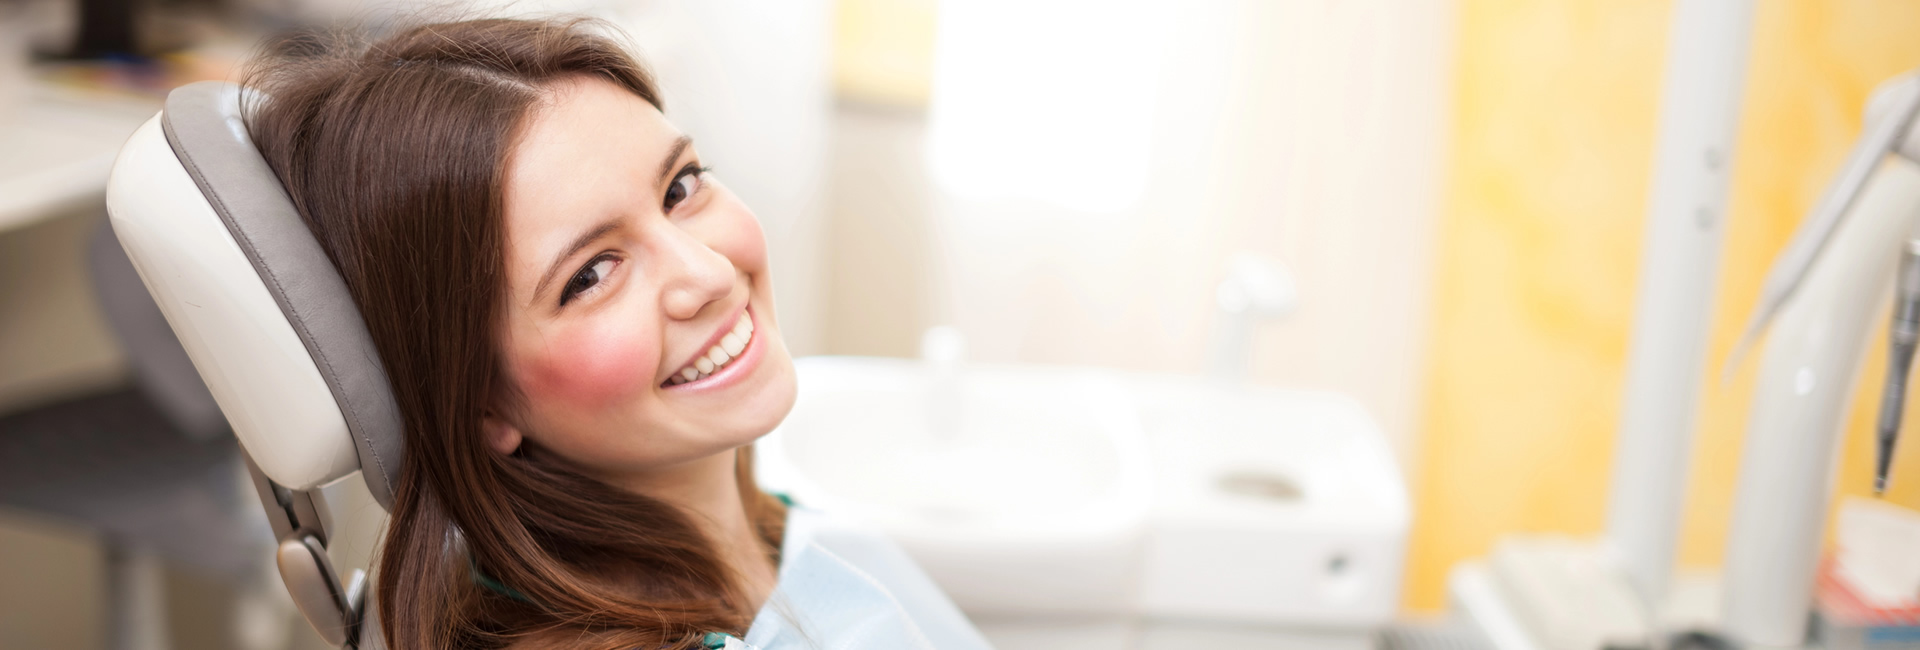 Affordable Family Dental Care Services